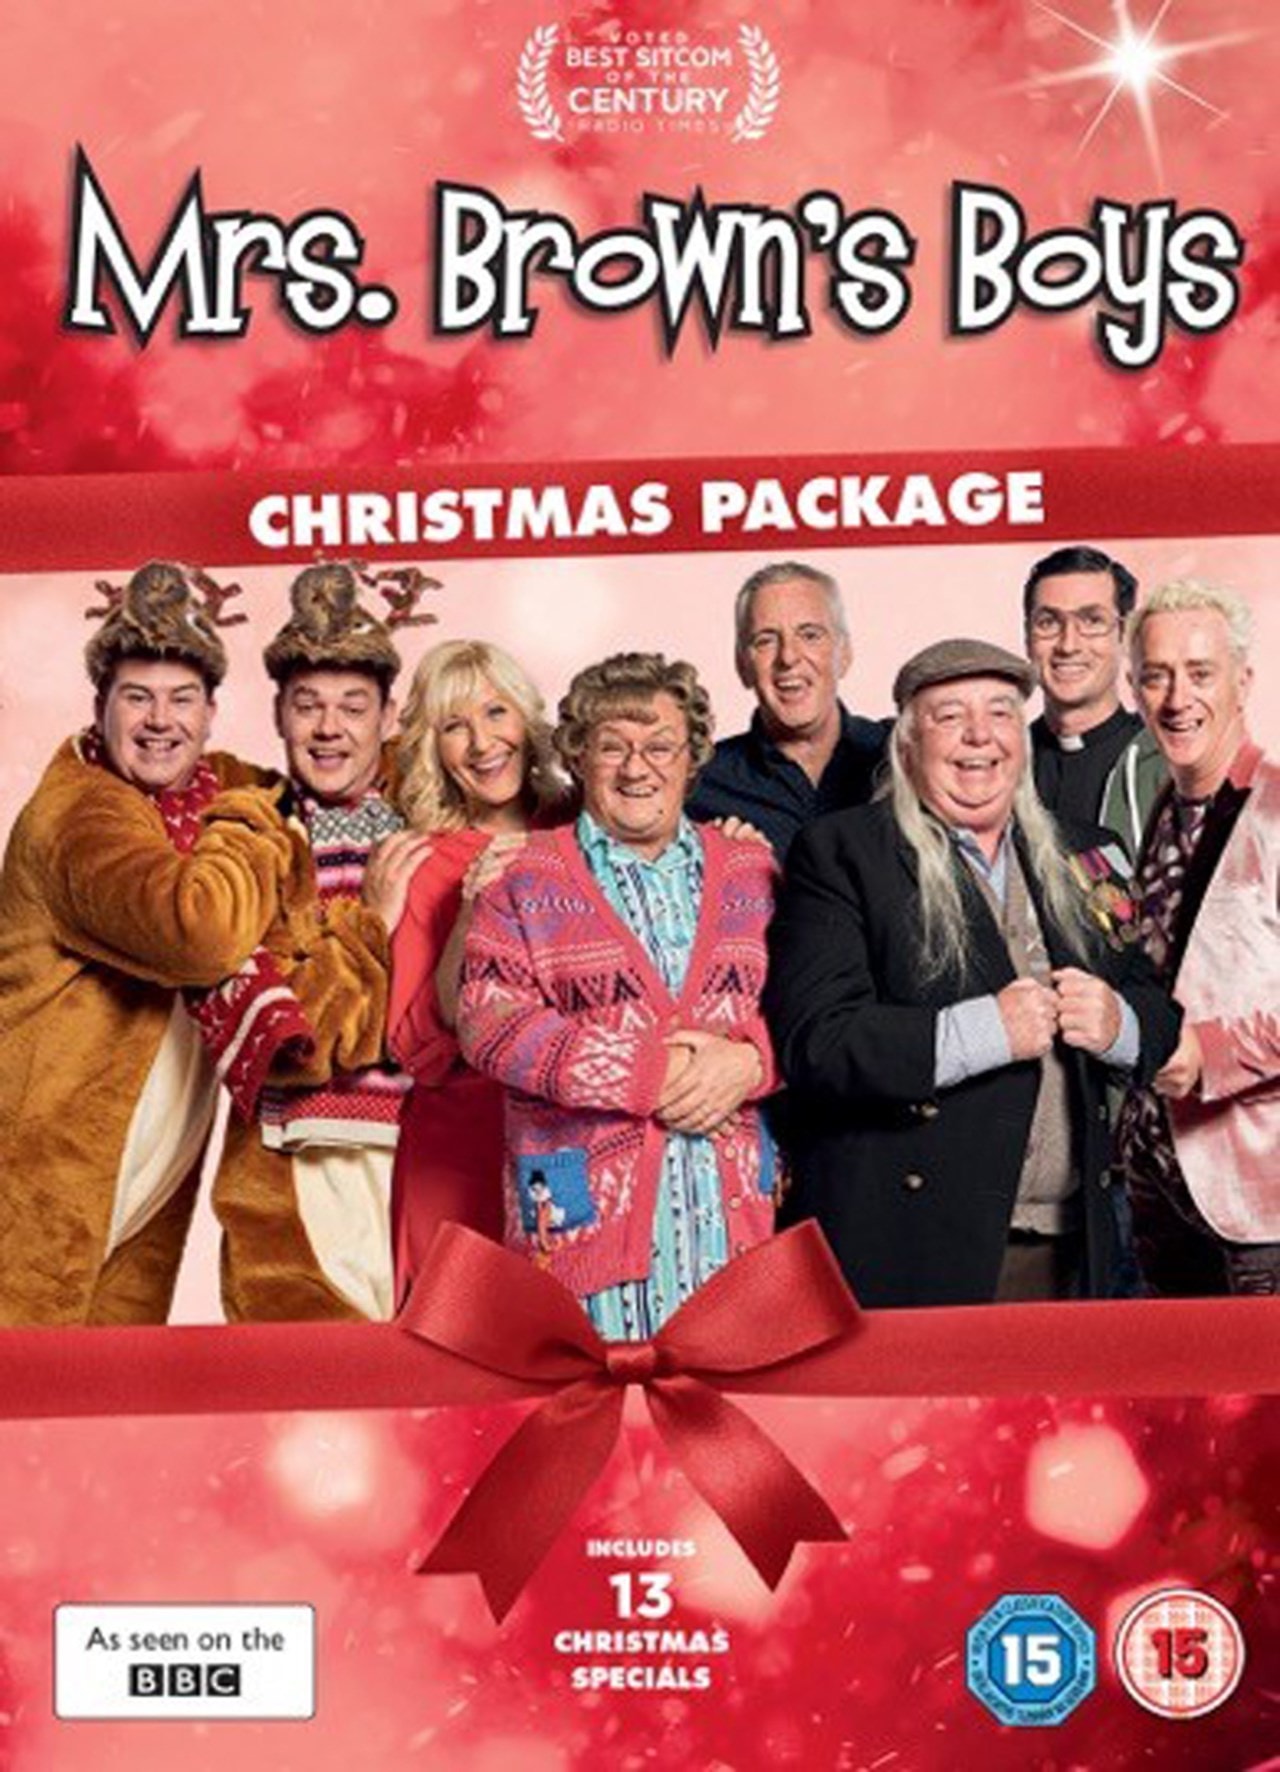 Mrs Brown's Boys Christmas Package DVD Box Set Free shipping over